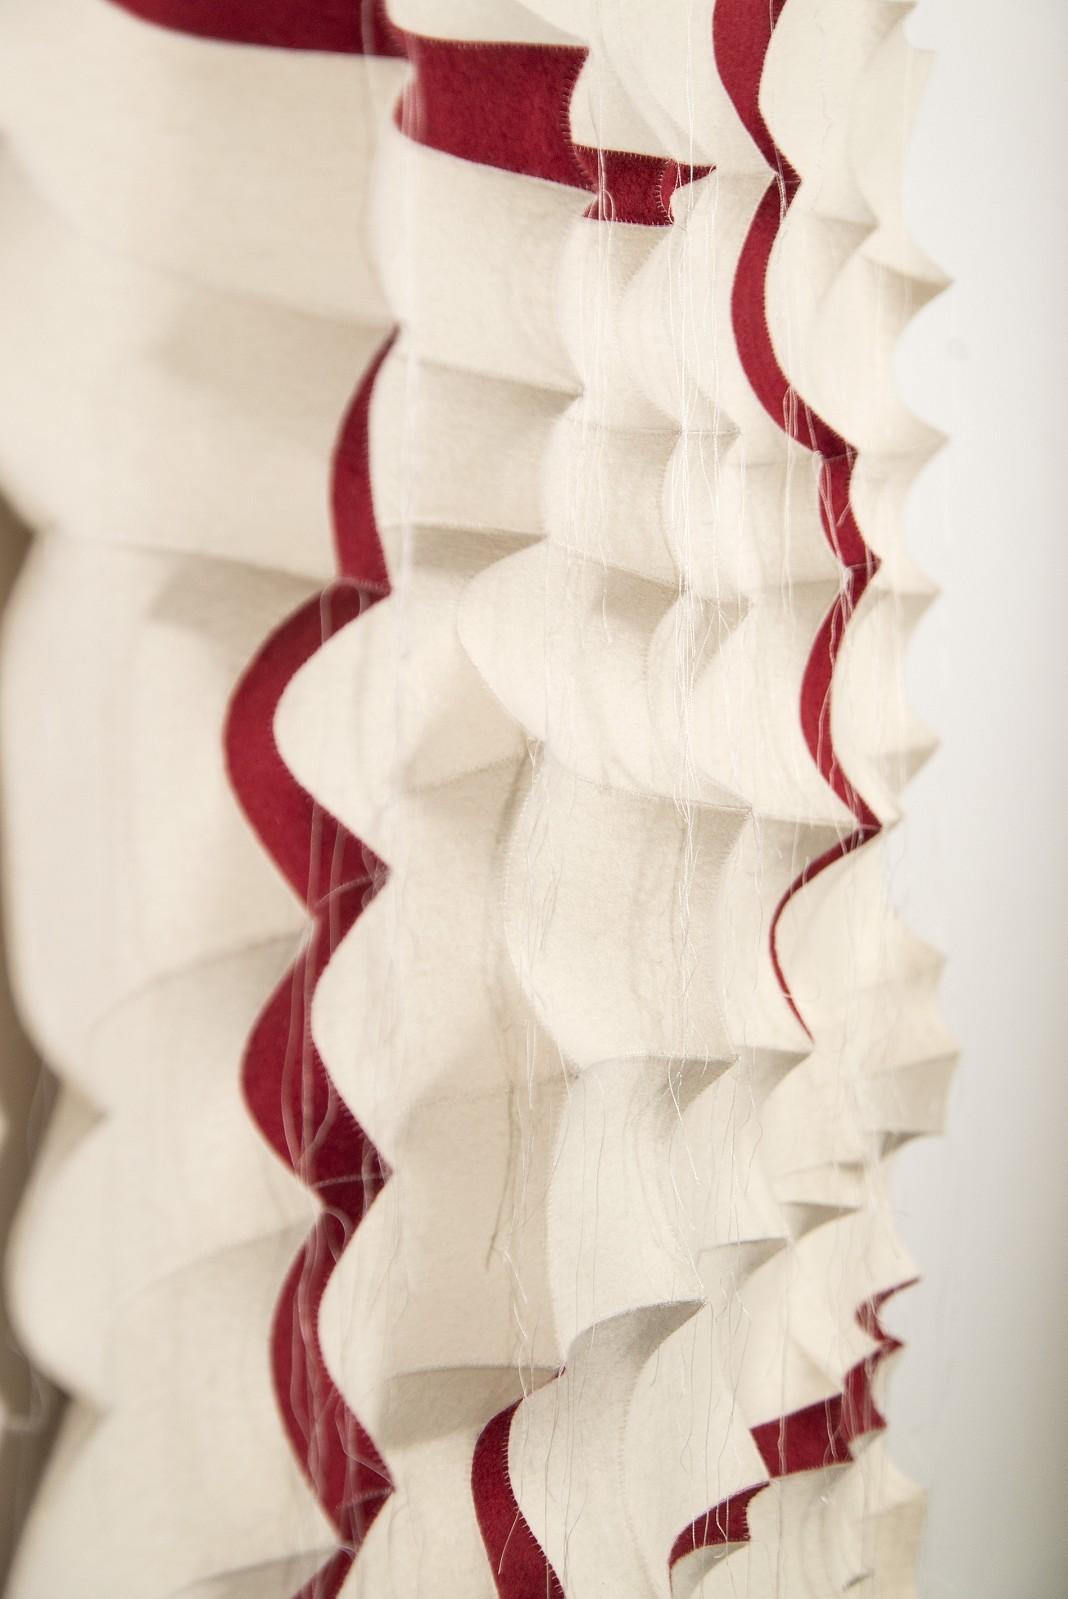 Tumsae 7 - red, white, pattern, wall hanging, 3D, felt, textile, tapestry - Sculpture by Chung-Im Kim